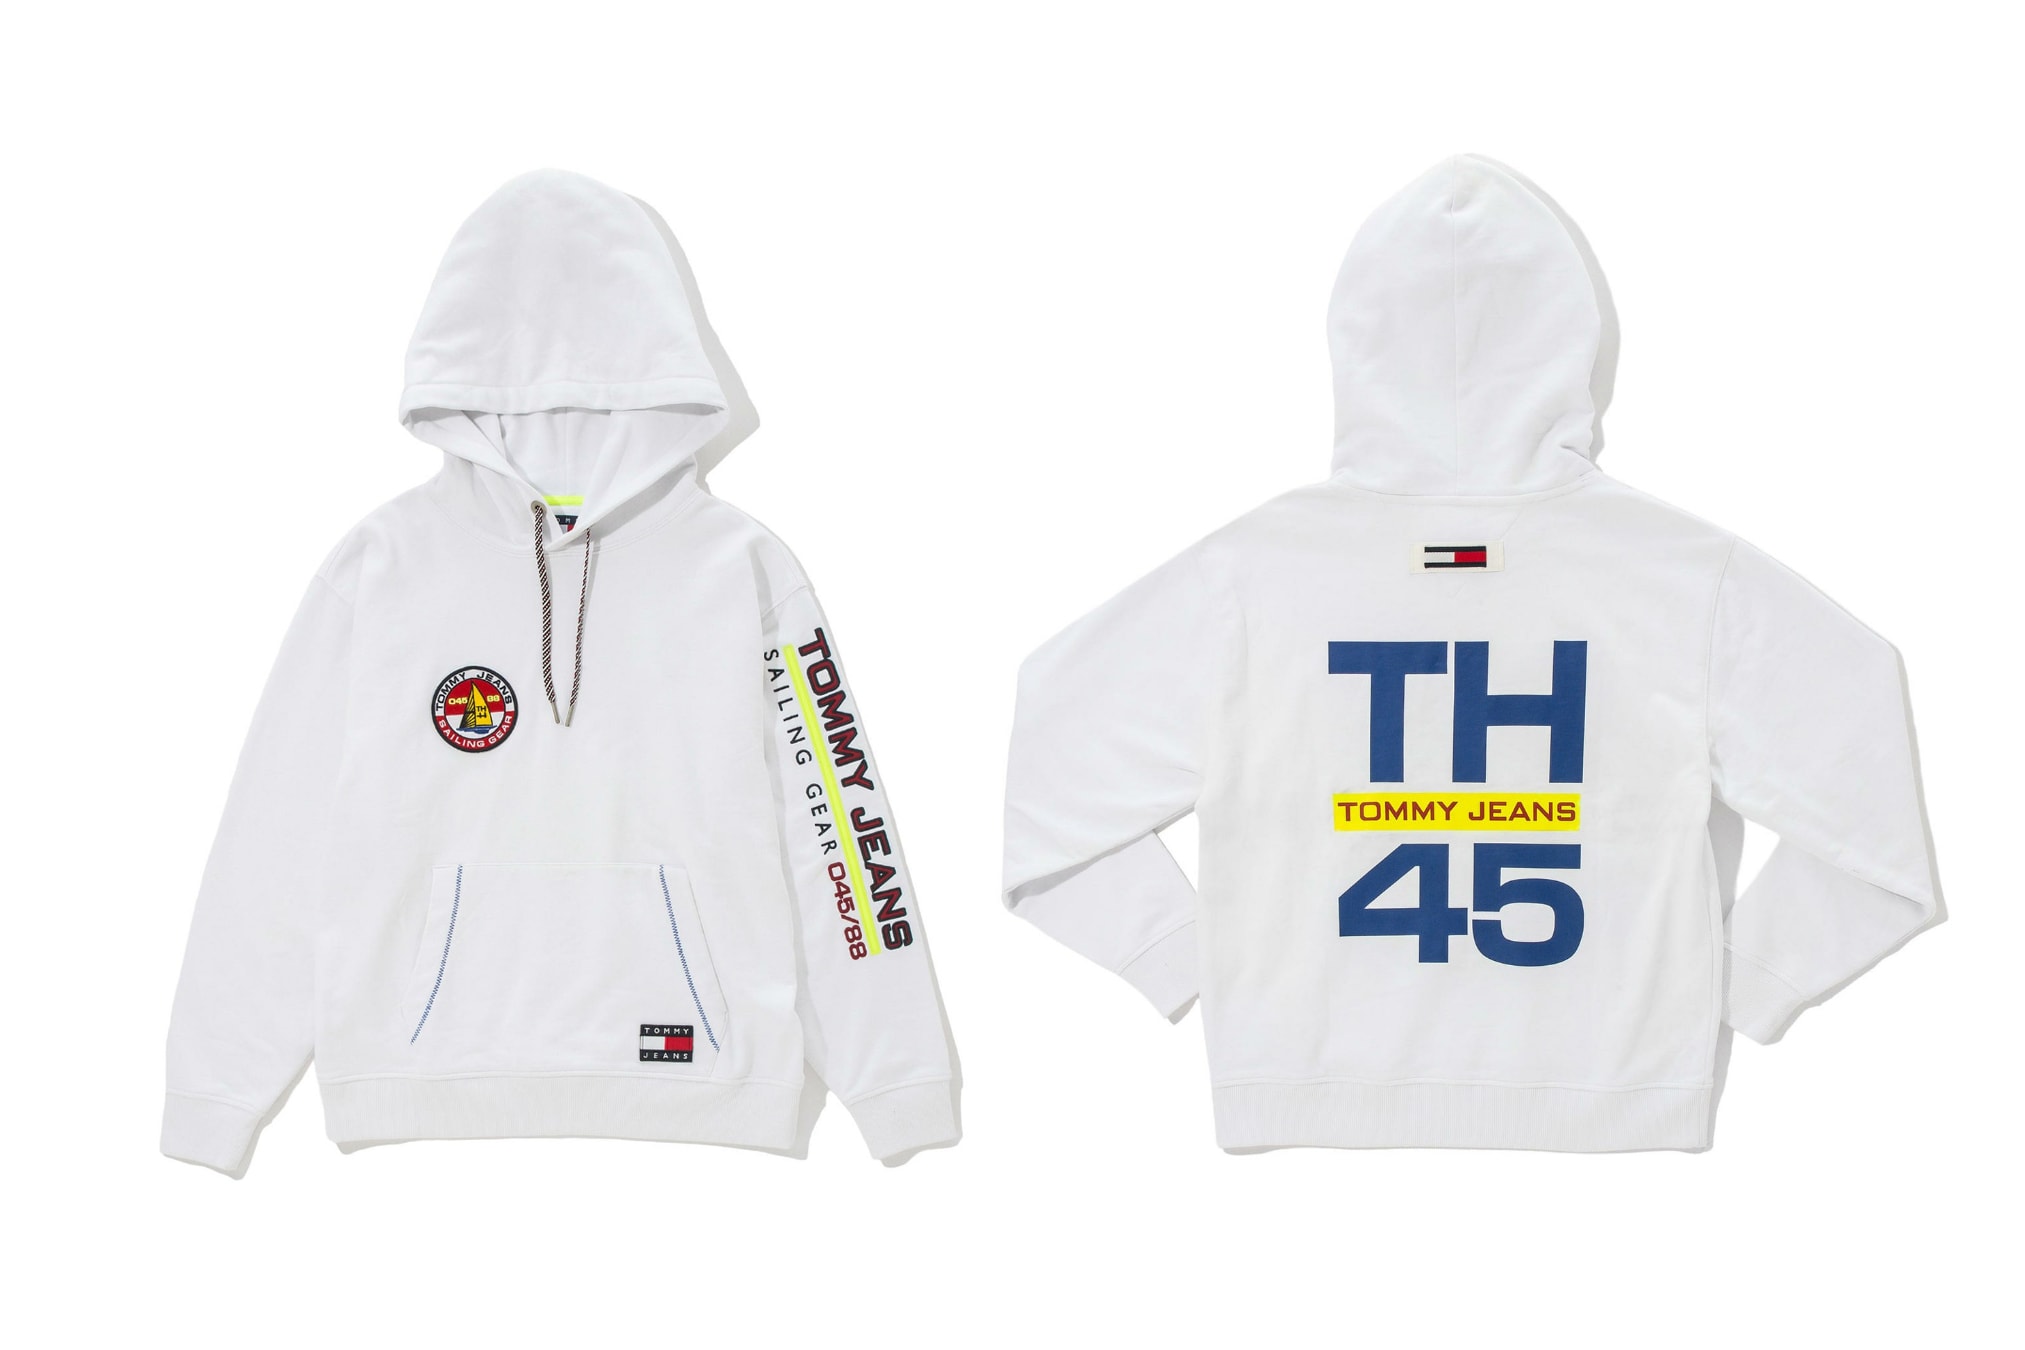 monkey time Tommy Hilfiger Sailing Gear Capsule collection Nylon Jacket Track Pants Sweater Hoodie Sweatshirt Jeans